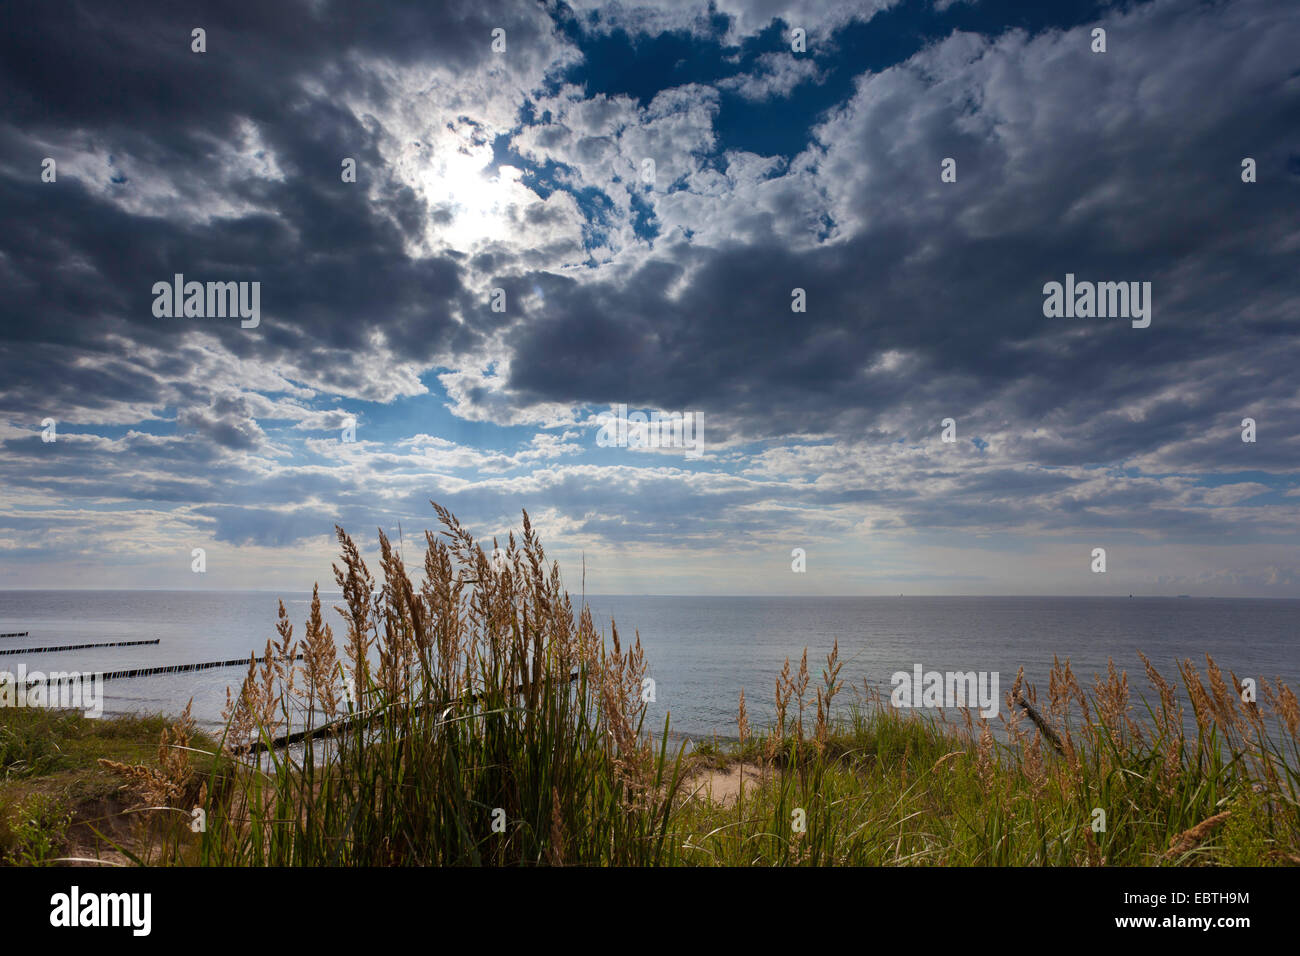 view from the reed-grown shore at the bodden, Germany, Mecklenburg-Western Pomerania, Fischland, Wustrow Stock Photo